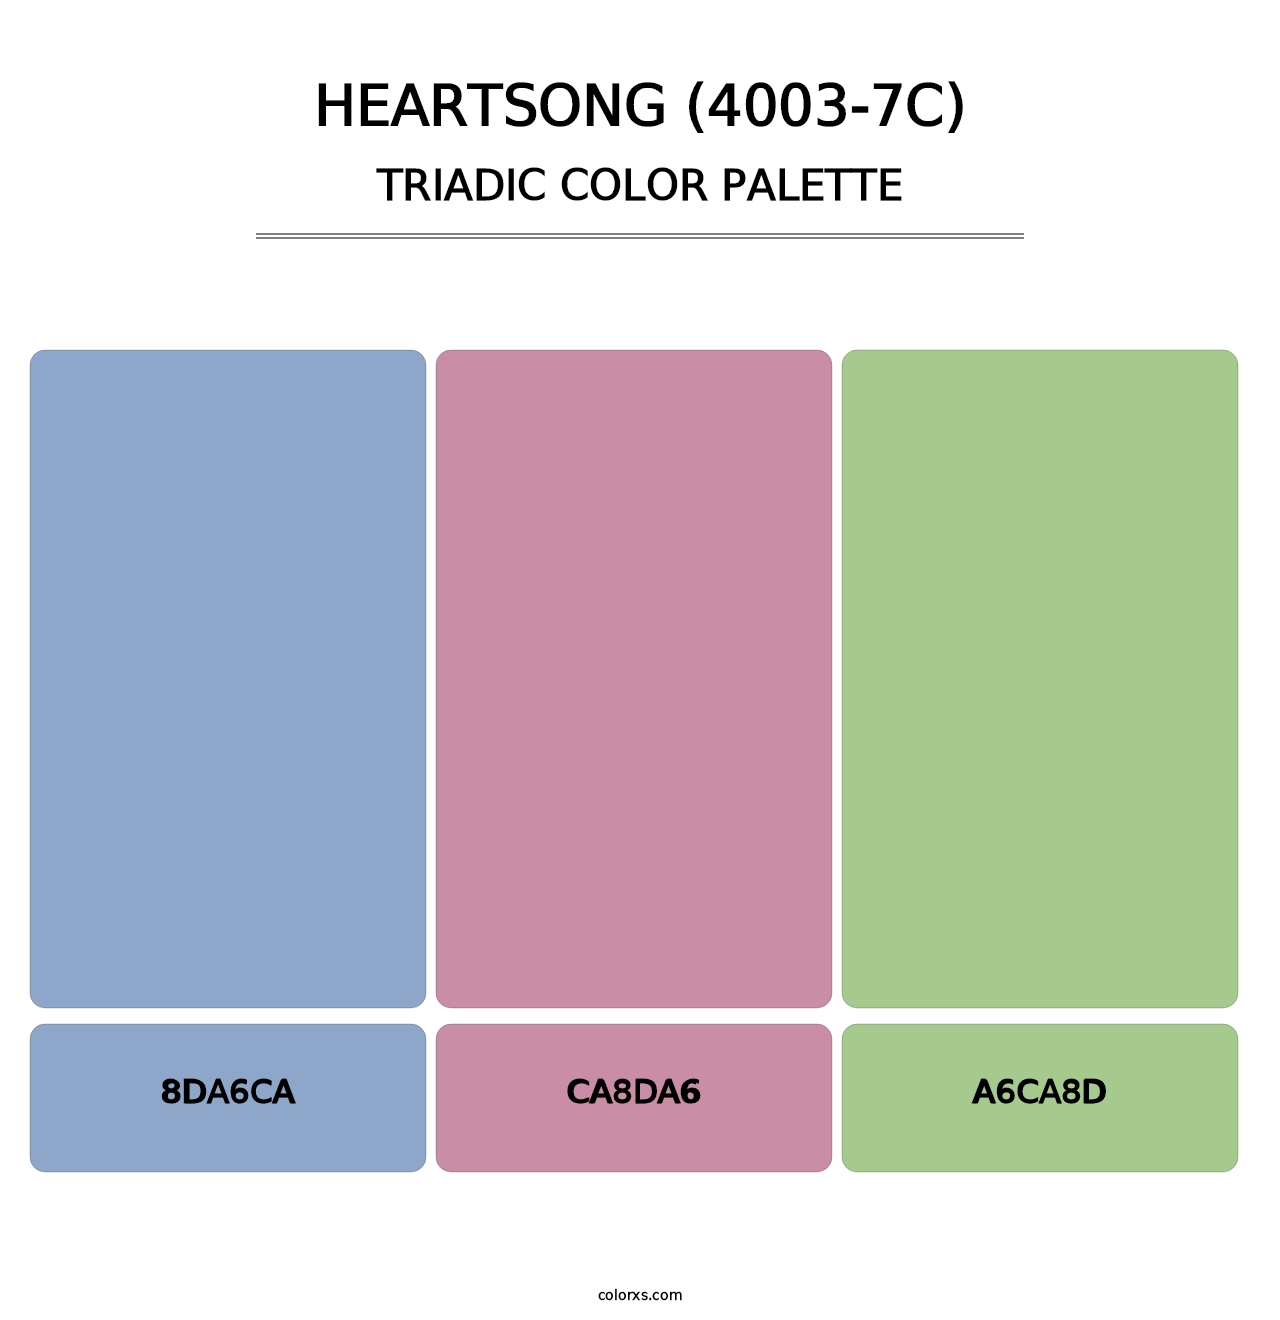 Heartsong (4003-7C) - Triadic Color Palette